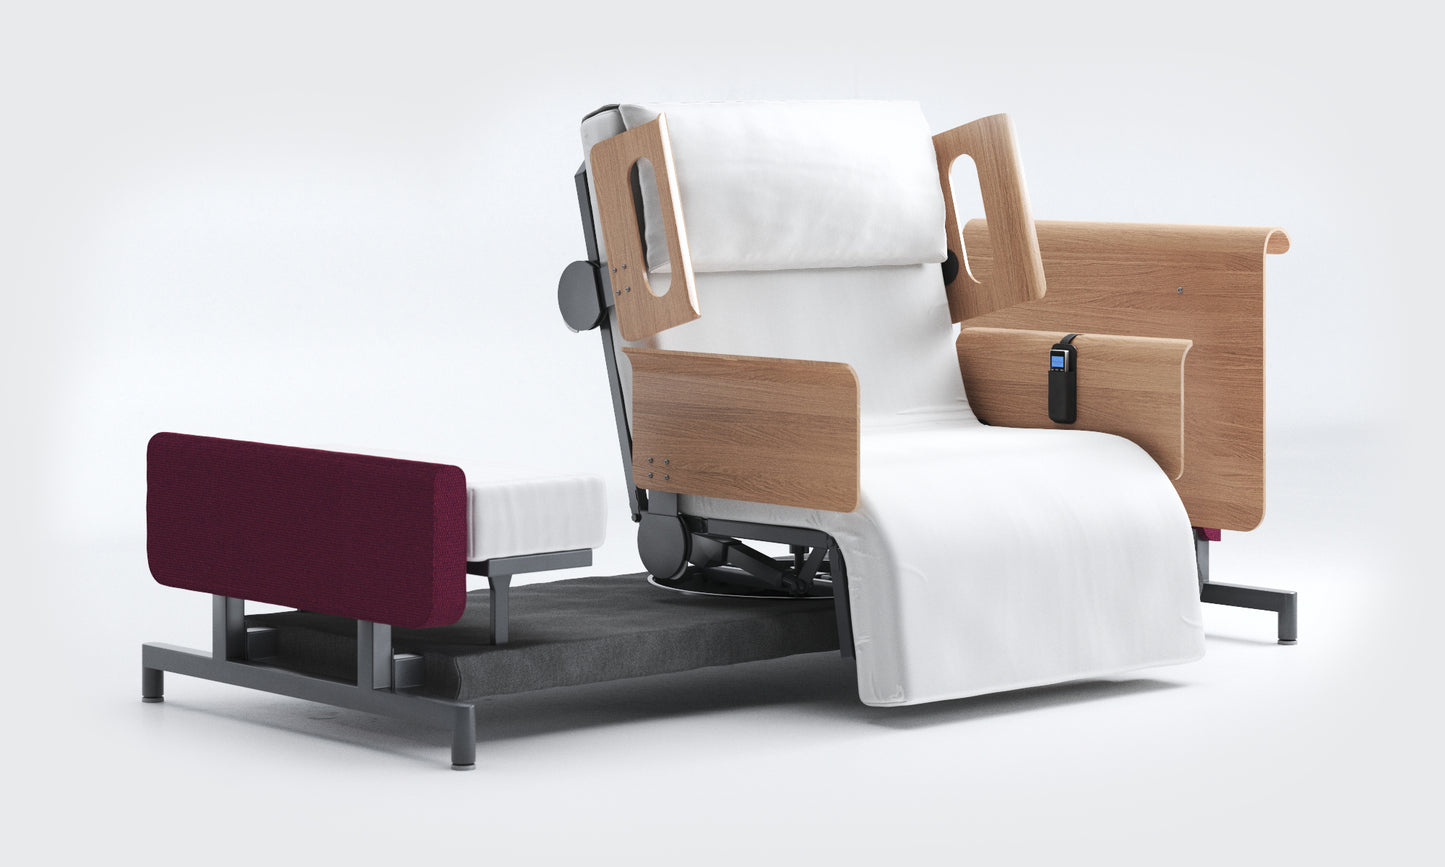 RotoBed® Home Rotating Chair Bed